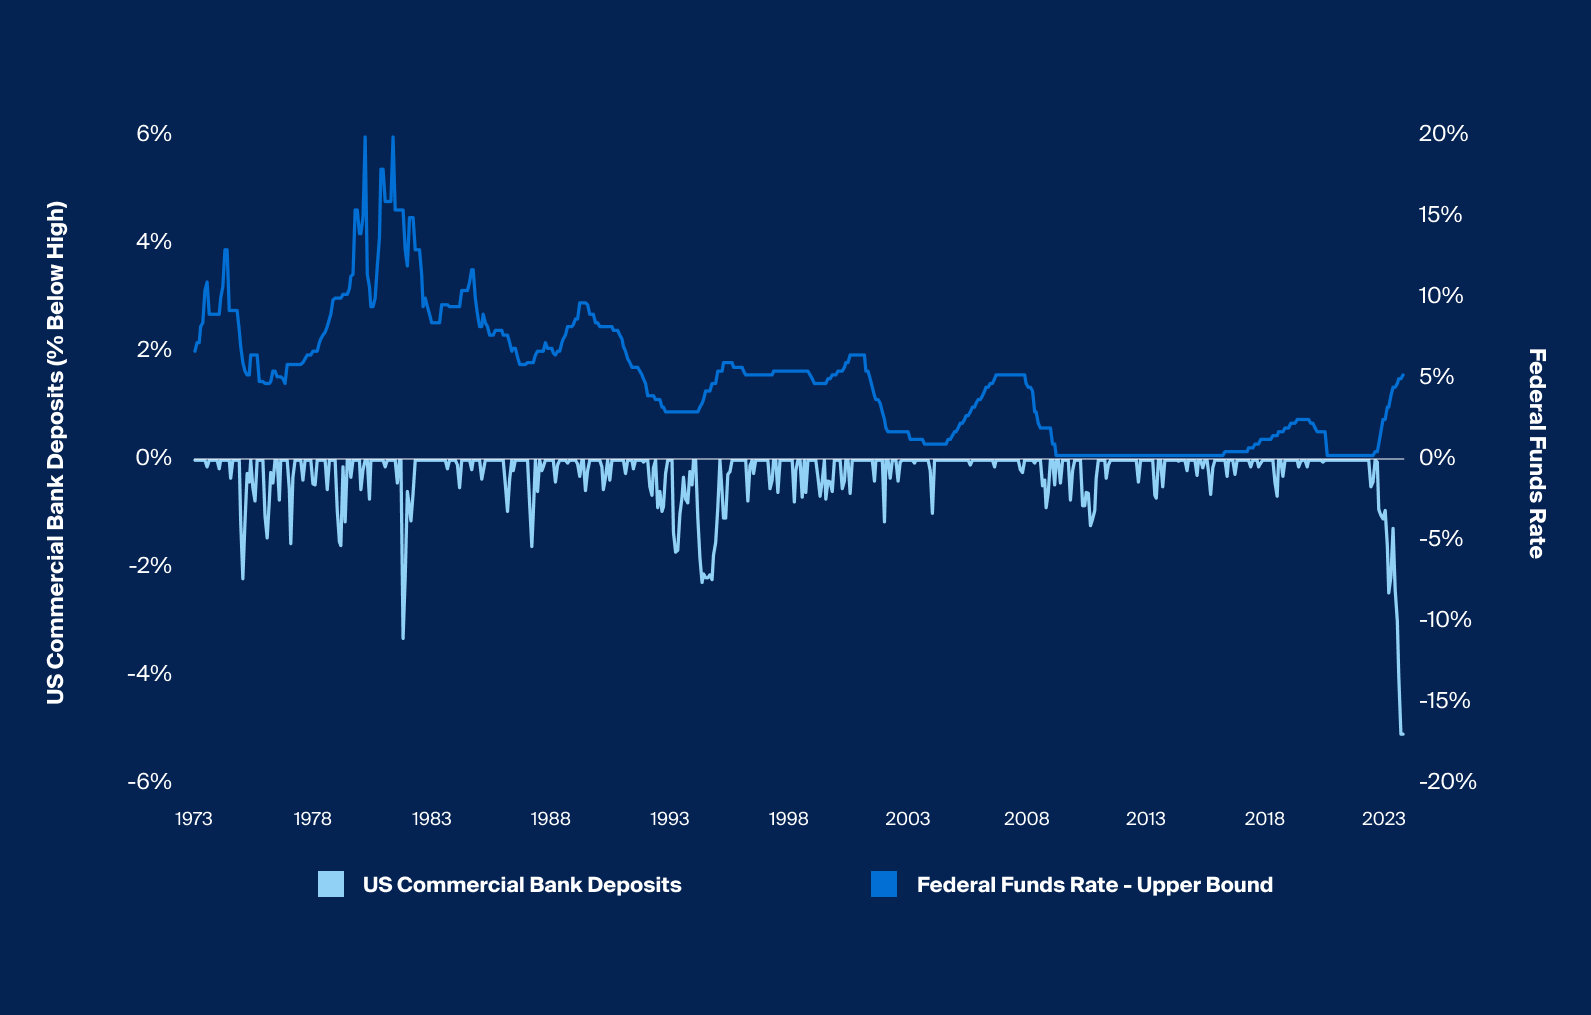 A historic deposit drawdown for US commercial banks has followed record interest rate increases (Exhibit 1) 